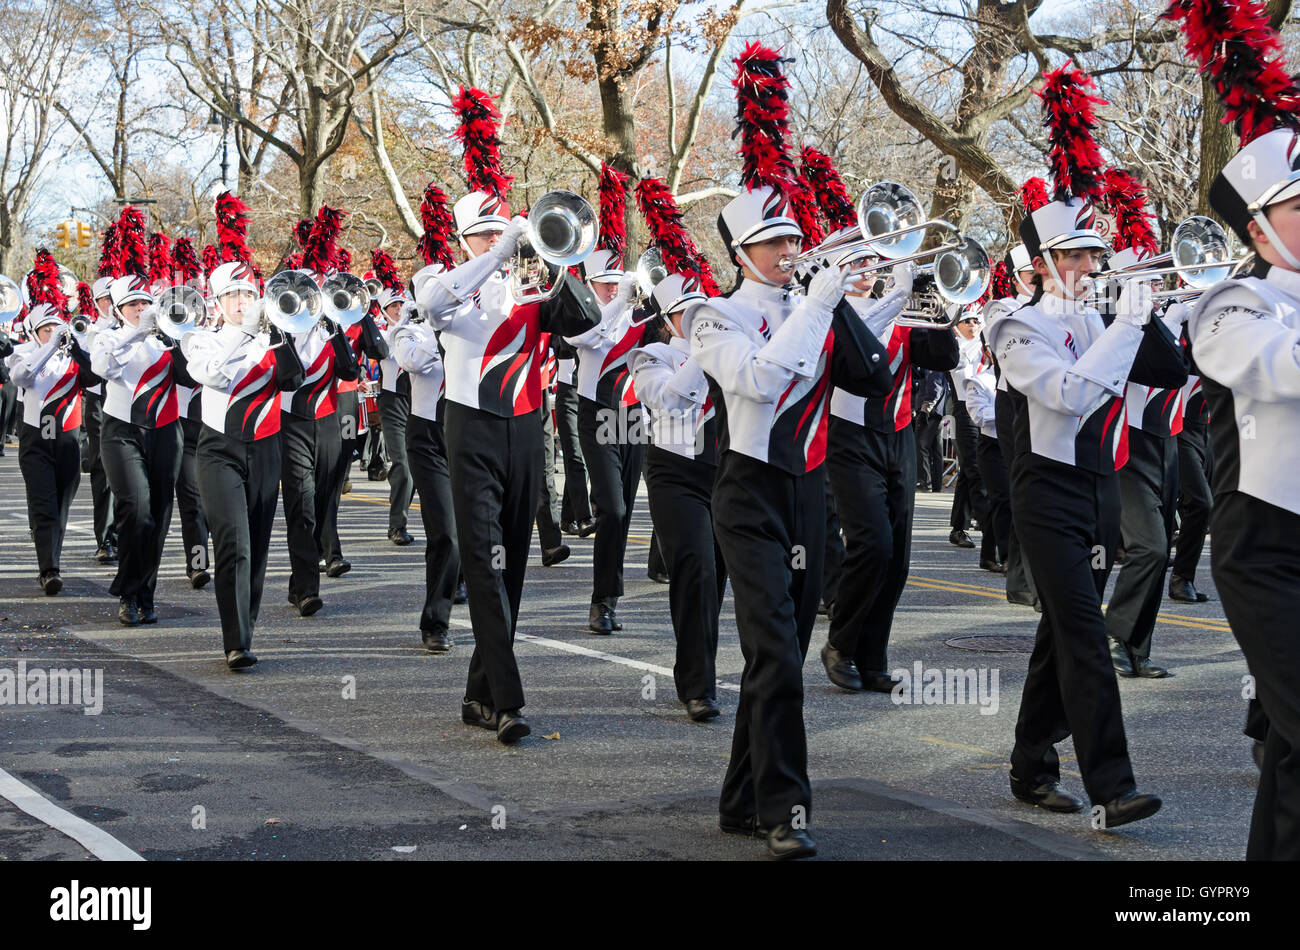 Brass players of the Marching Firebirds of Lakota West in Macy's Thanksgiving Day Parade, New York City. Stock Photo